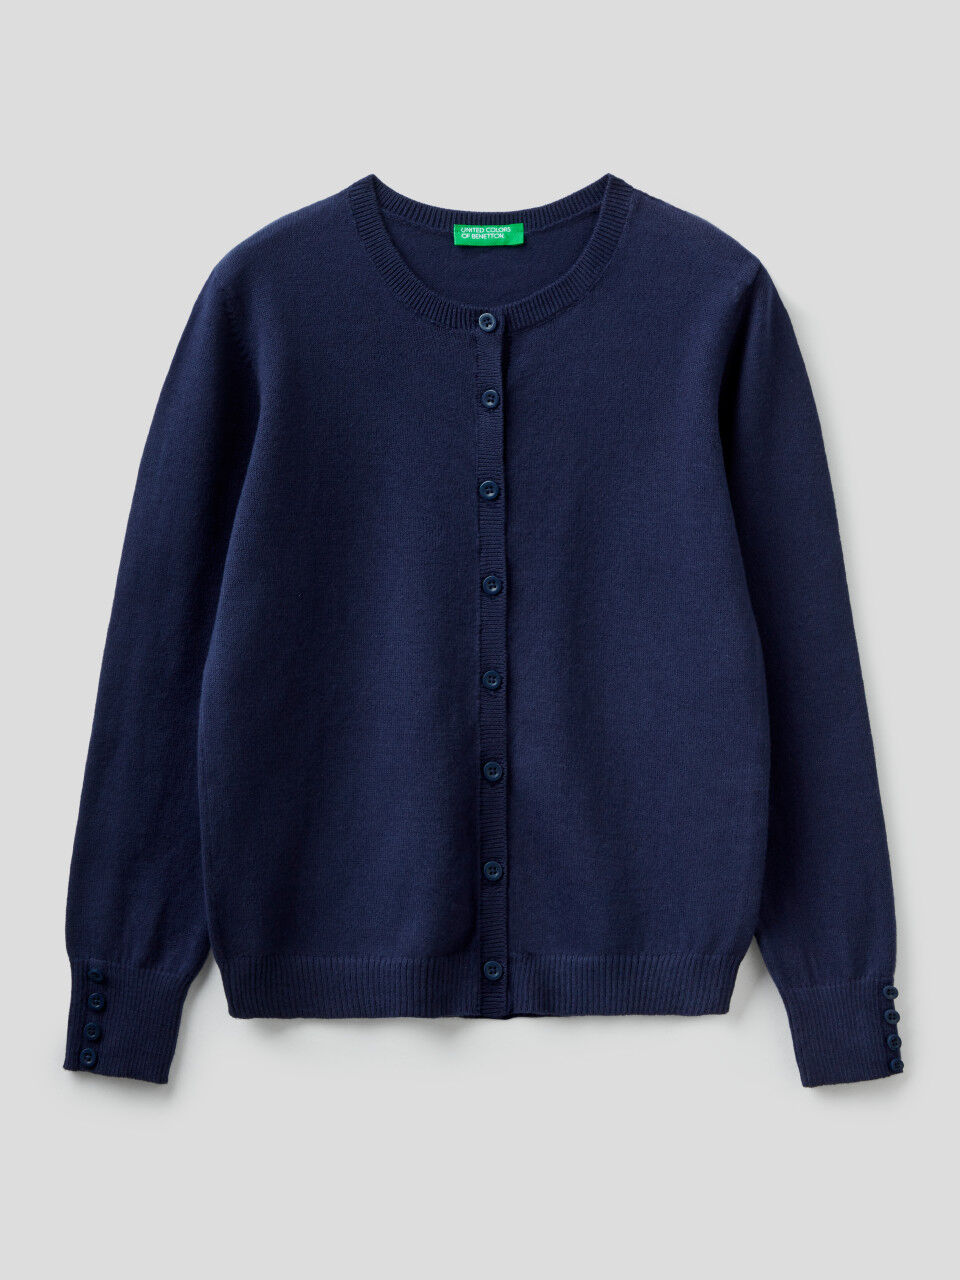 United Colors of Benetton Girls L/S Cardigan